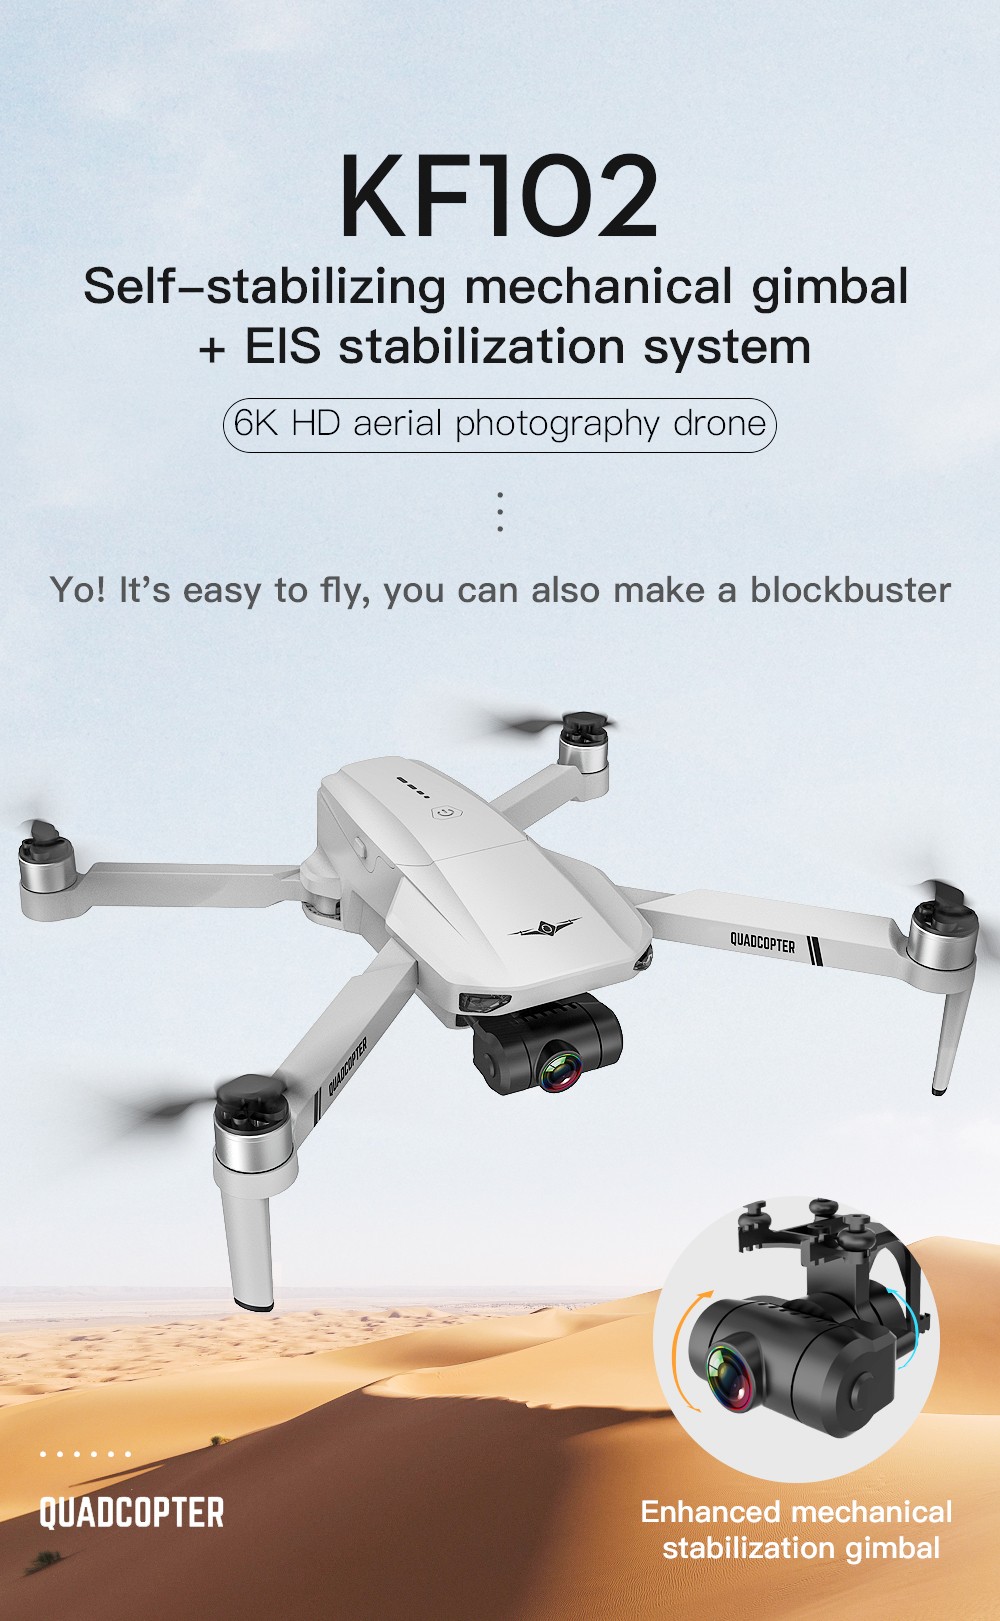 Grab the KF102 6K Camera GPS 5G WIFI FPV 2-Axis Self-stabilizing Drone for Only 129€